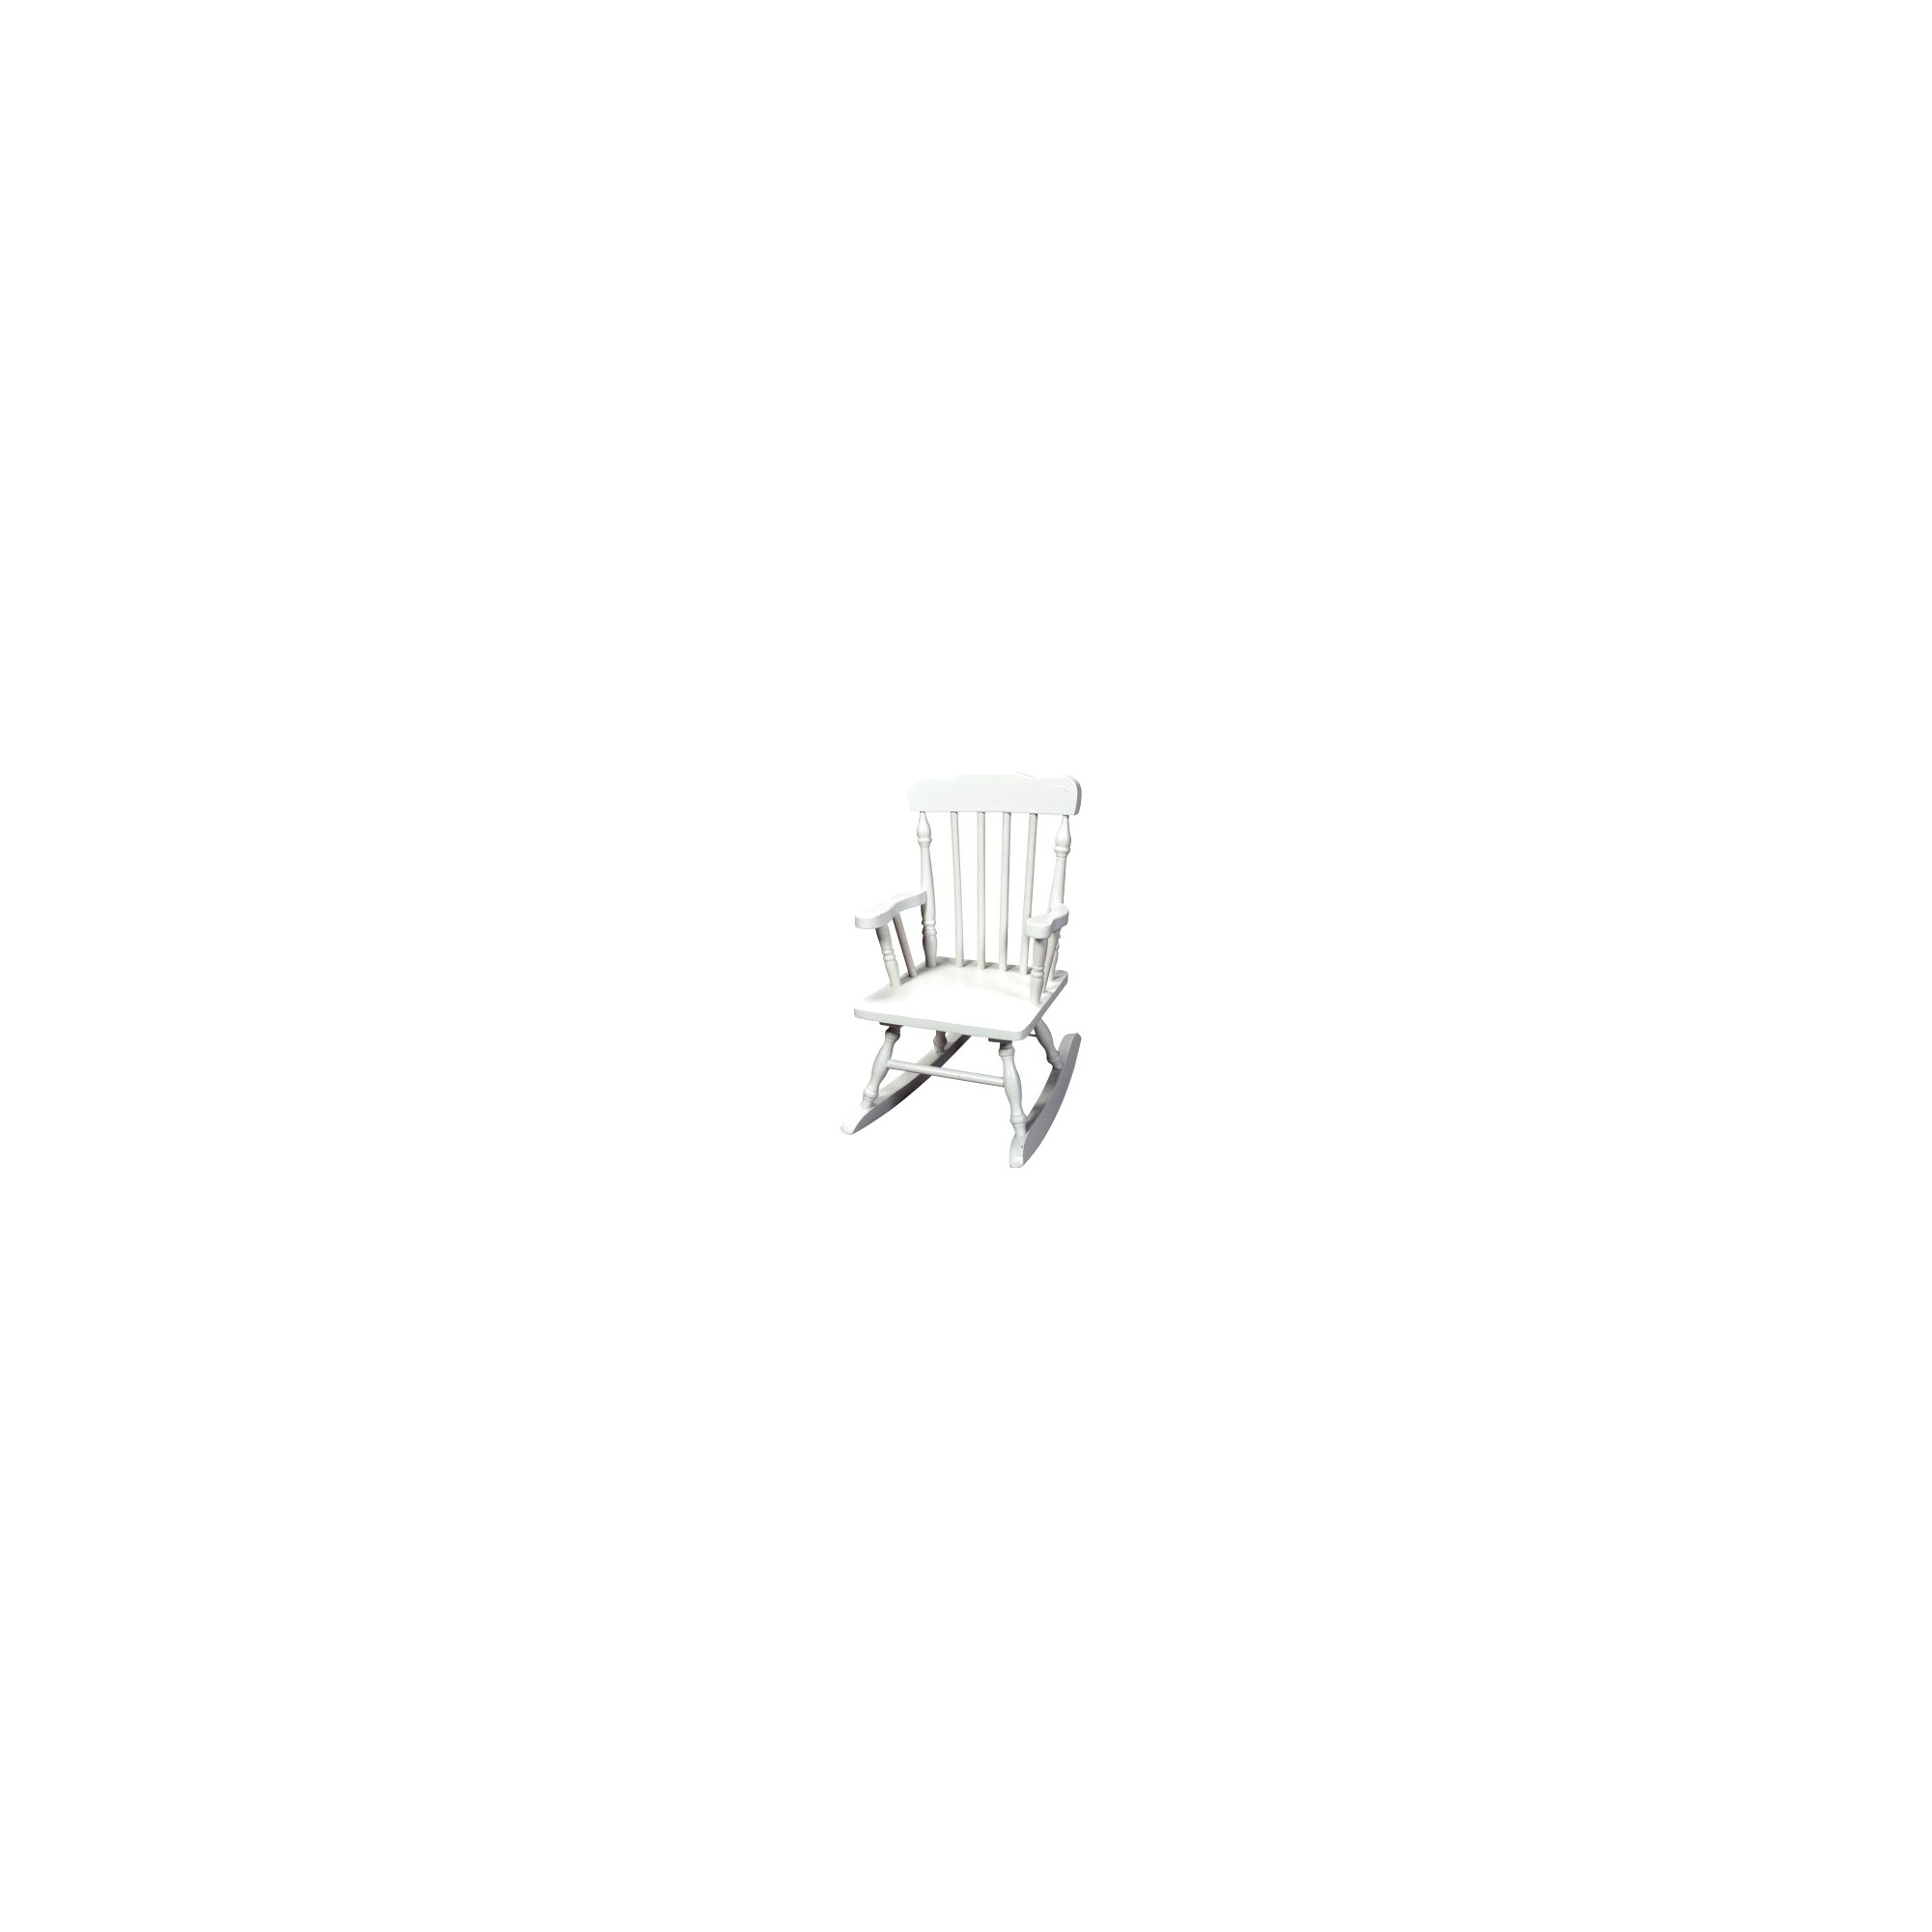 Kids' Colonial Rocking Chair - White